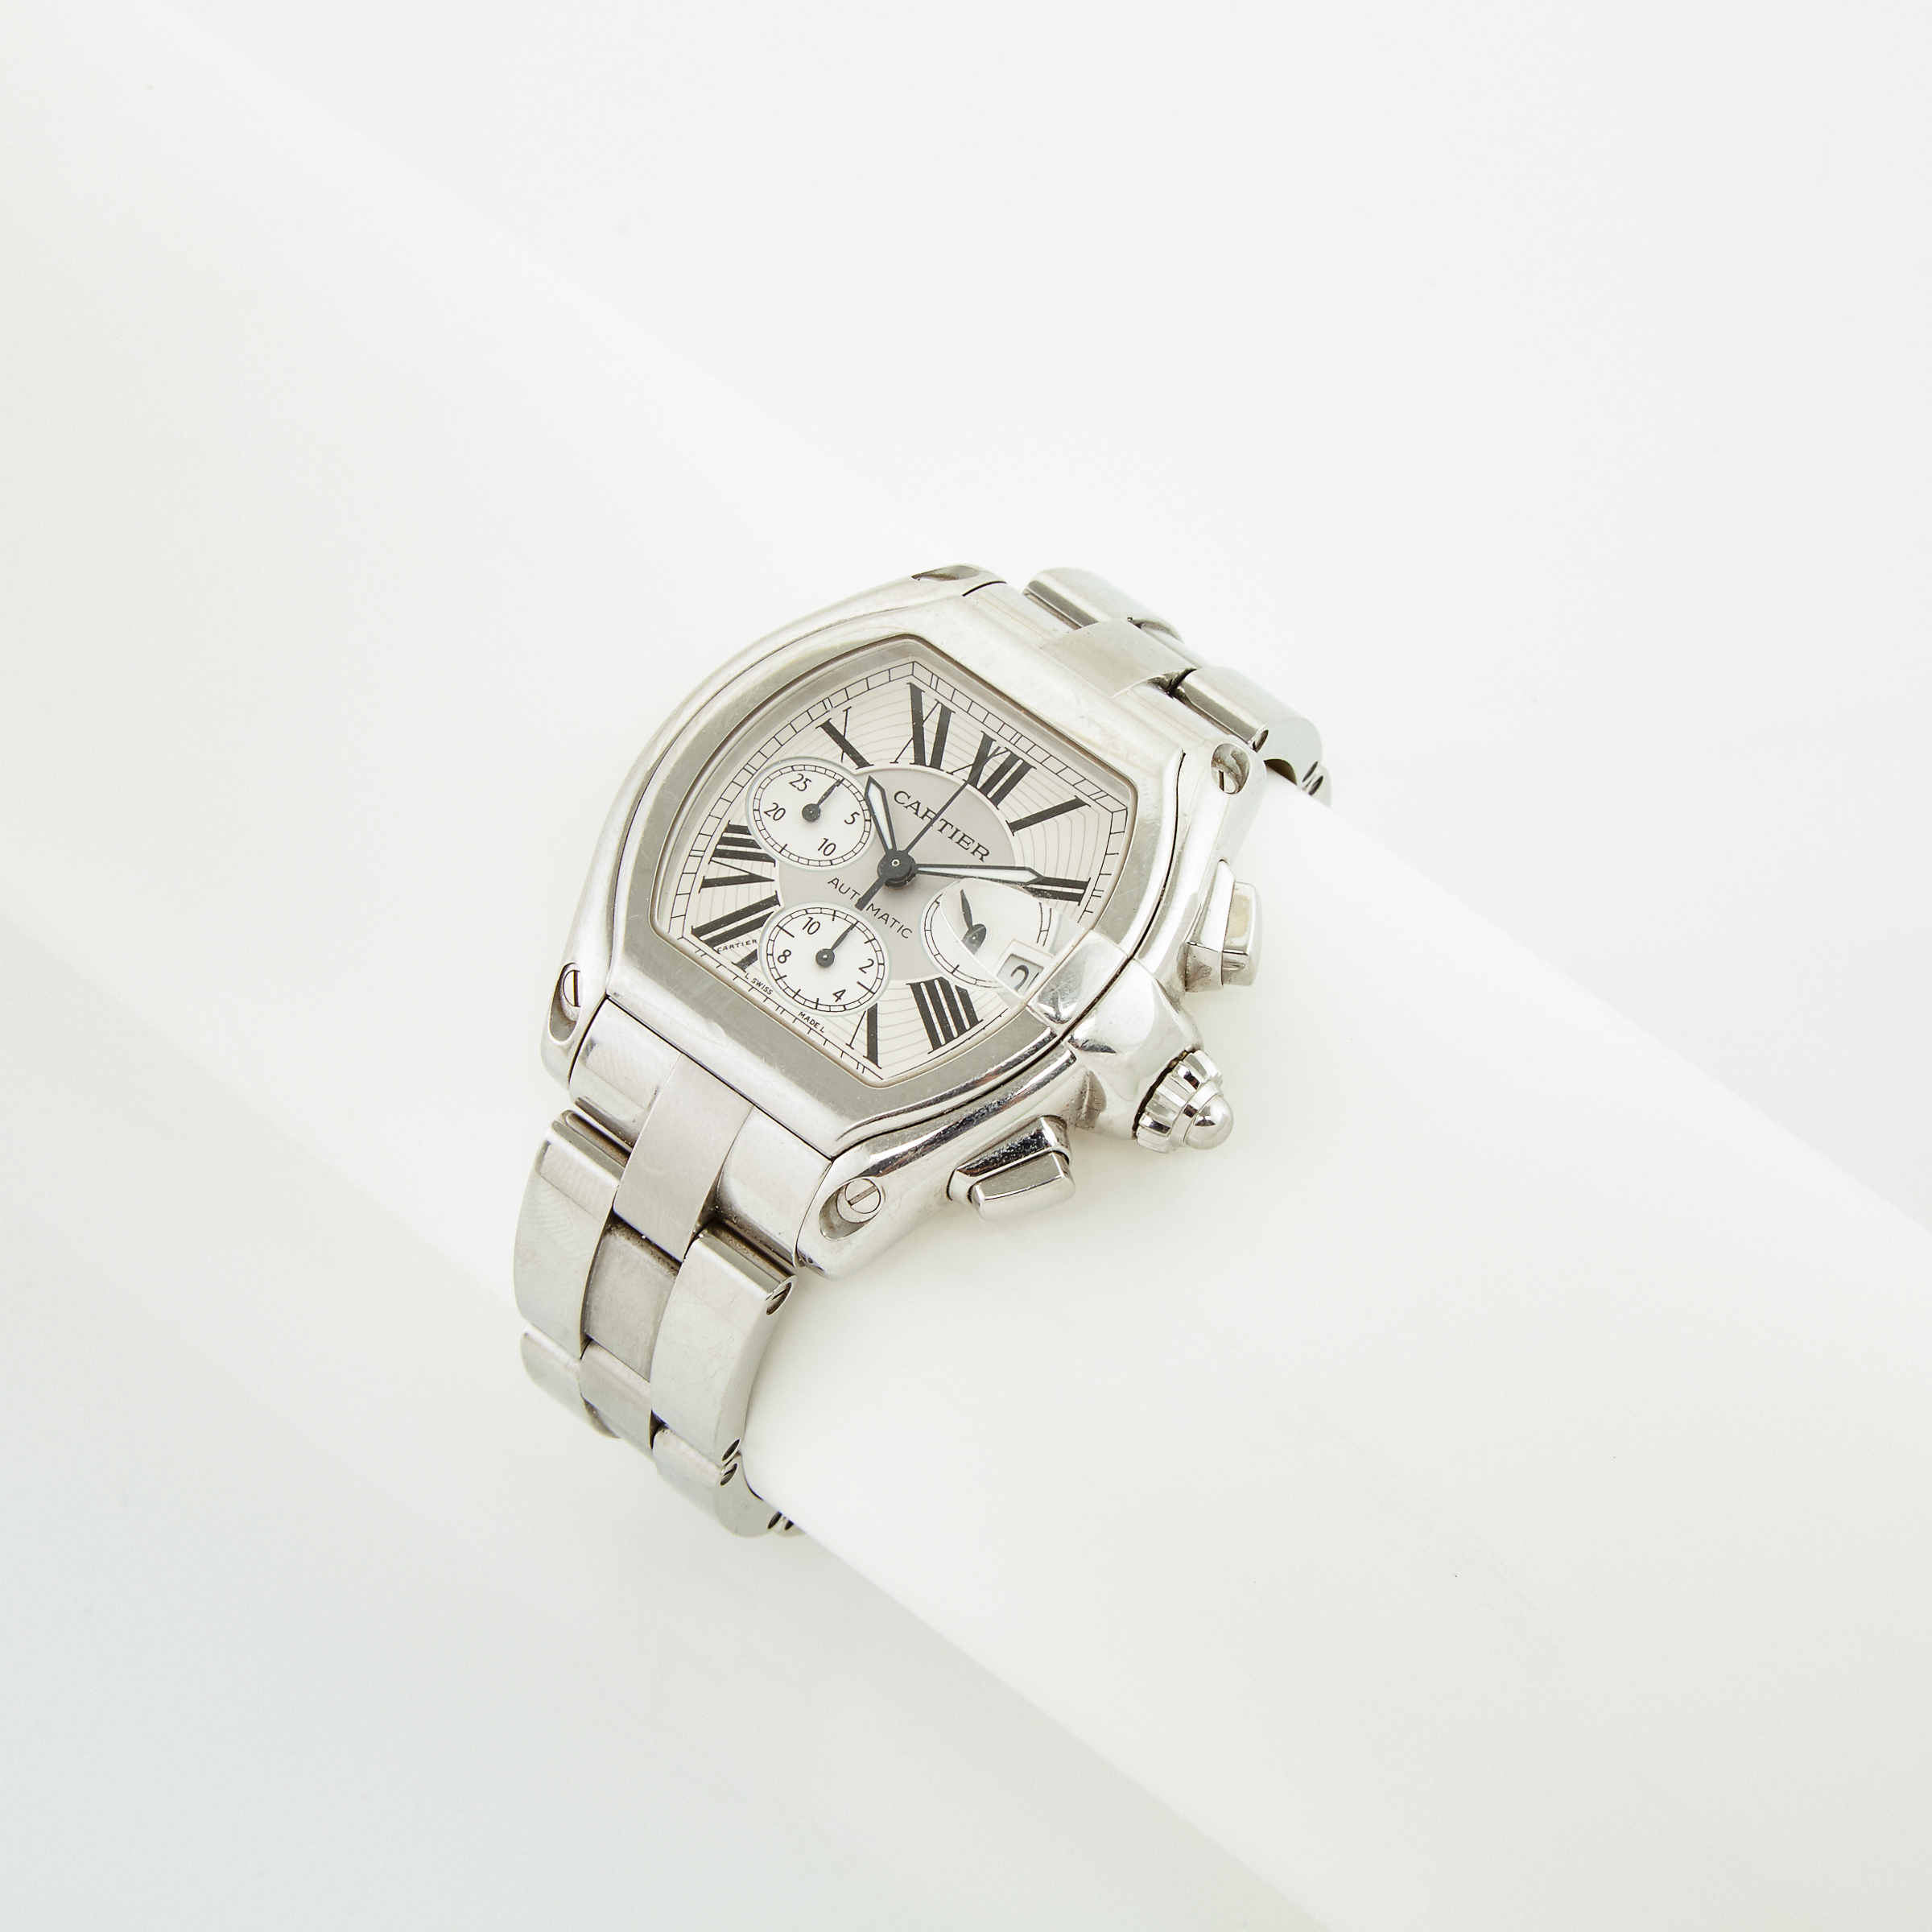 Cartier Roadster XL Wristwatch with Chronograph and Date